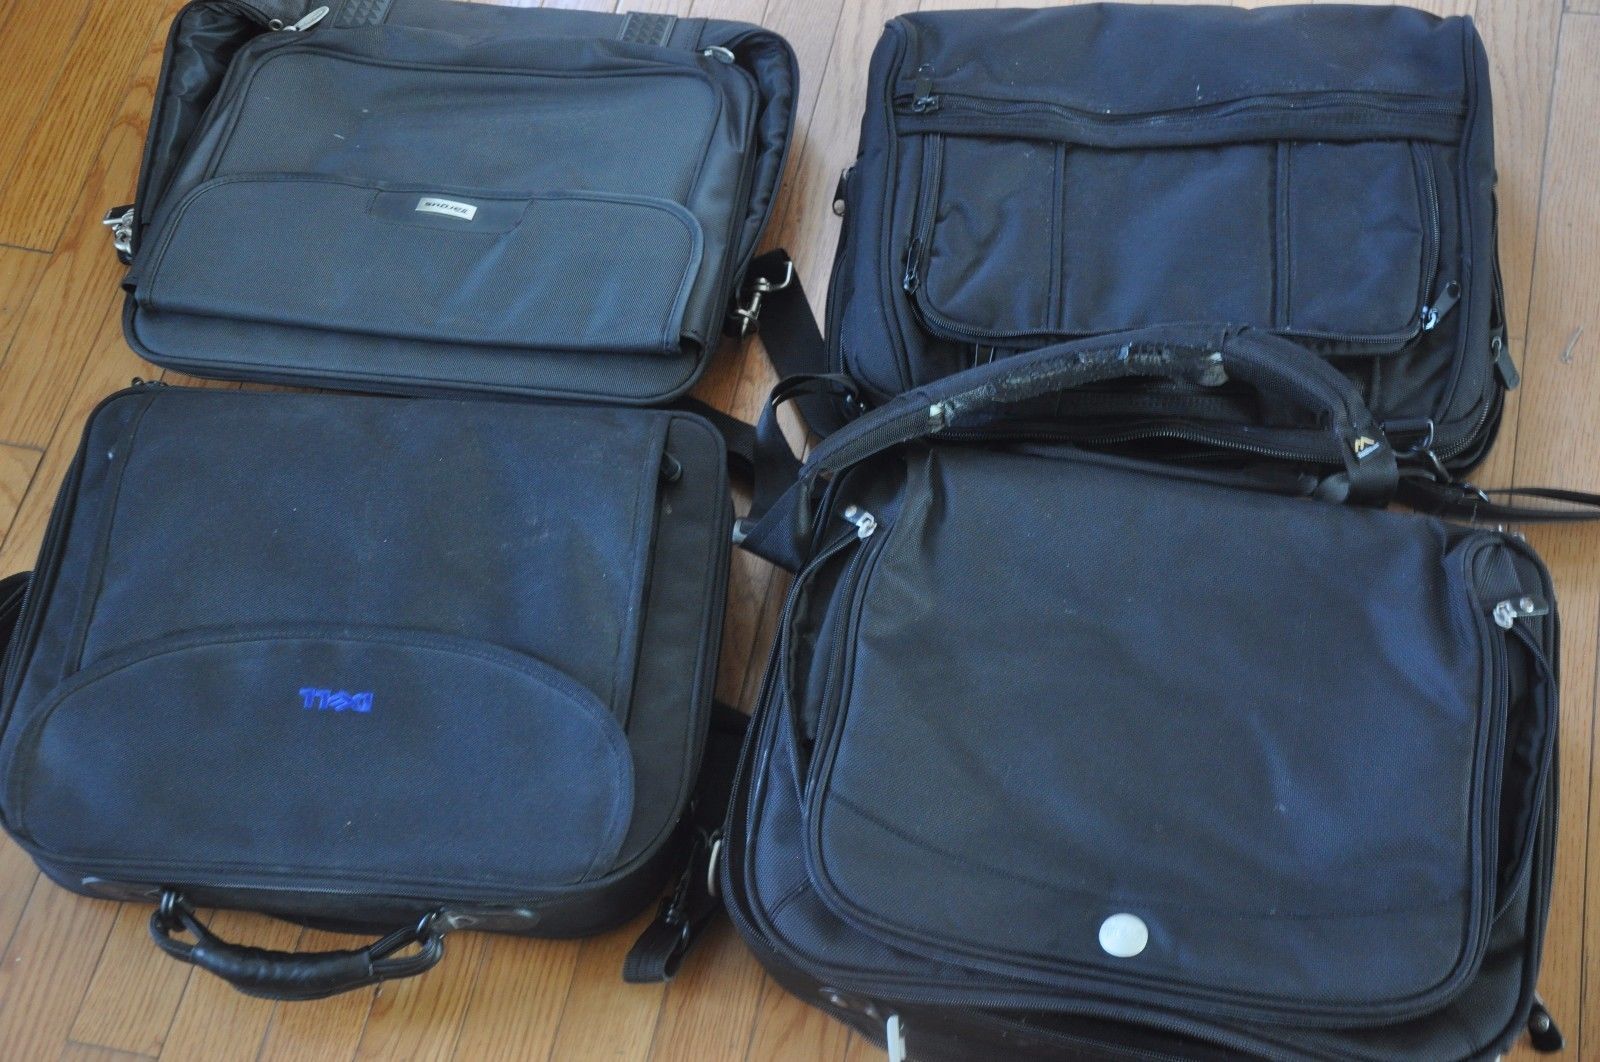 Various DELL LAPTOP BAG  TOPLOAD FITS UP TO 15.6" CARRYING CASE - $8.99 - $9.99